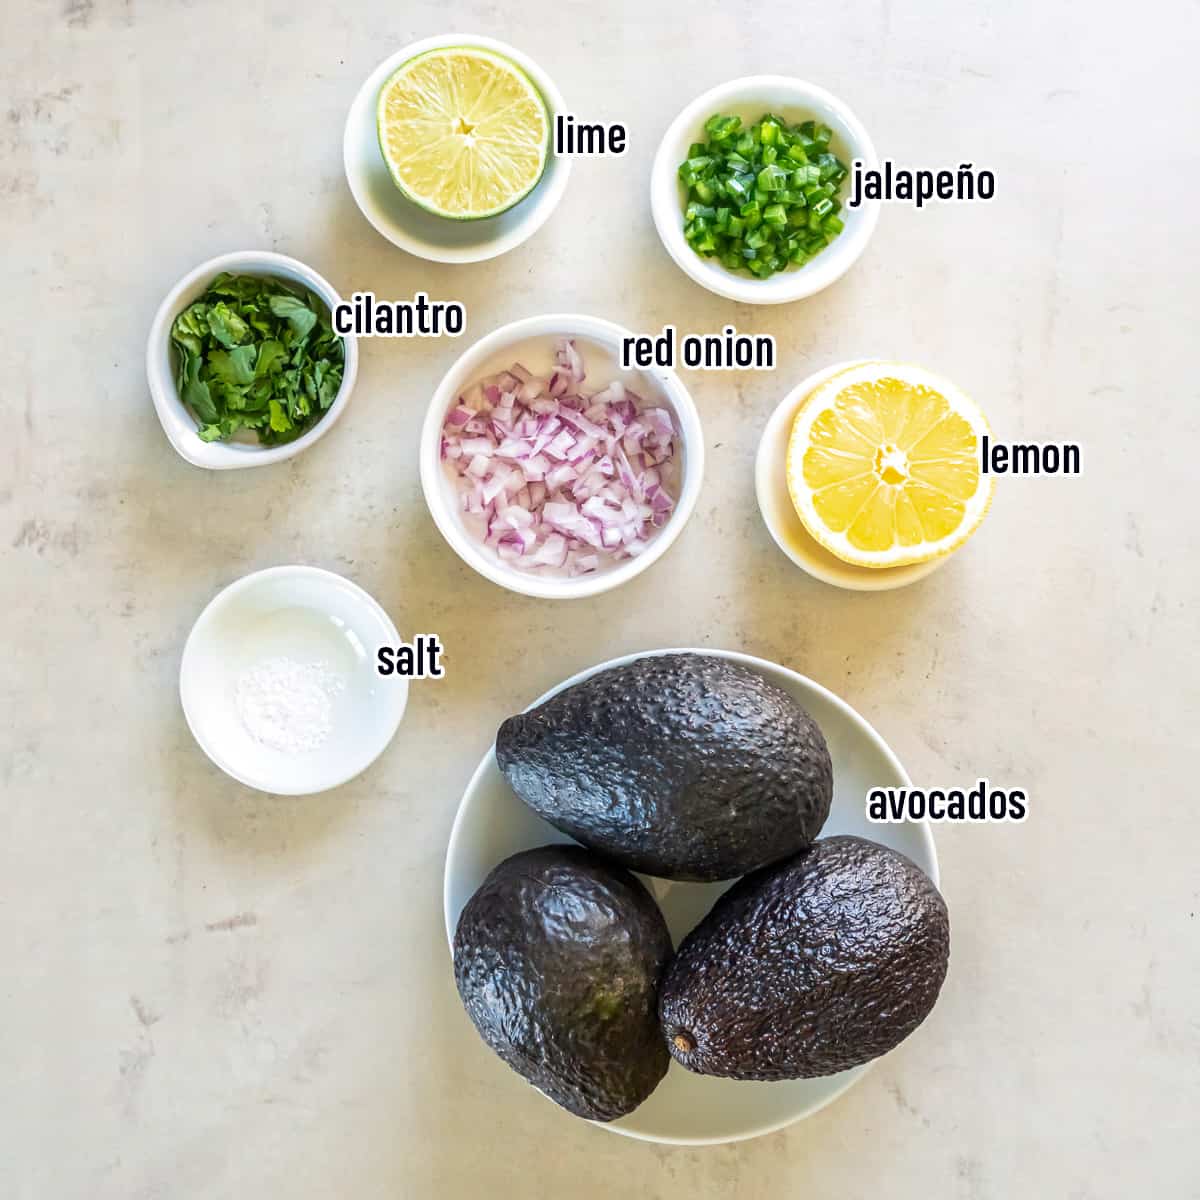 Avocados, diced red onion, jalapeno, and other ingredients for copycat Chipotle Guacamole in bowls with text.